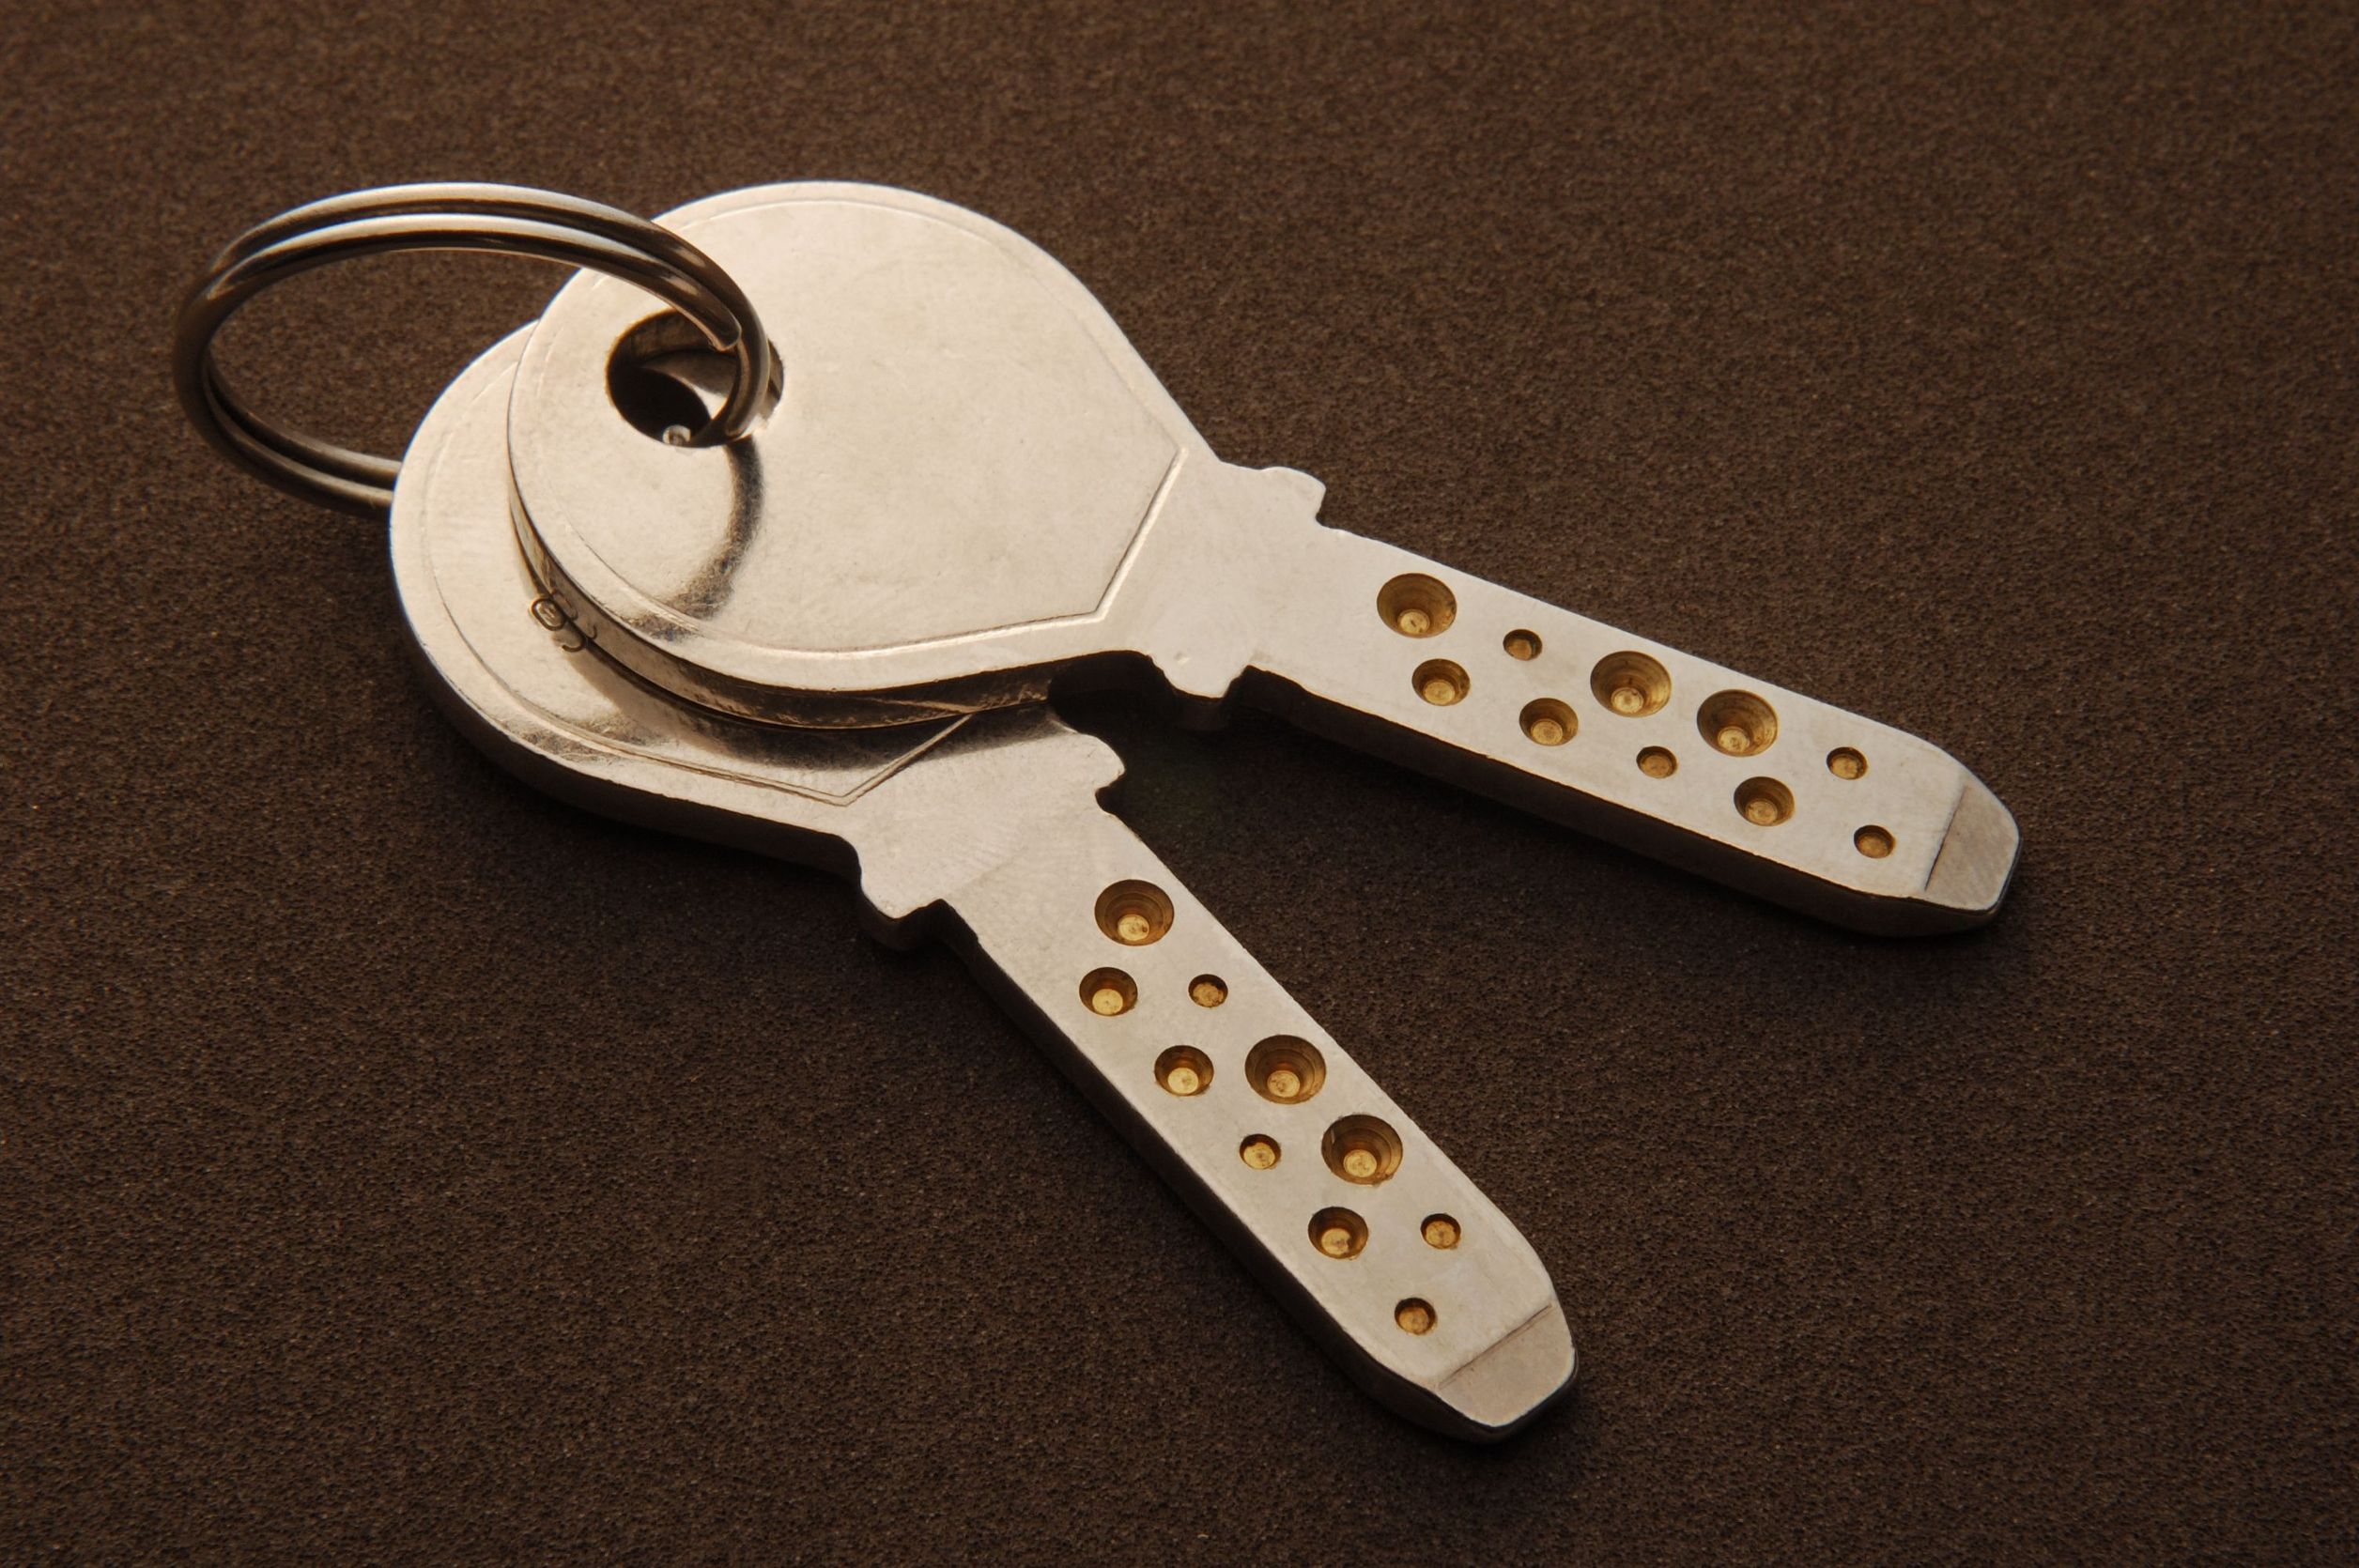 Do You Need Residential Locksmith Services in St Louis MO?